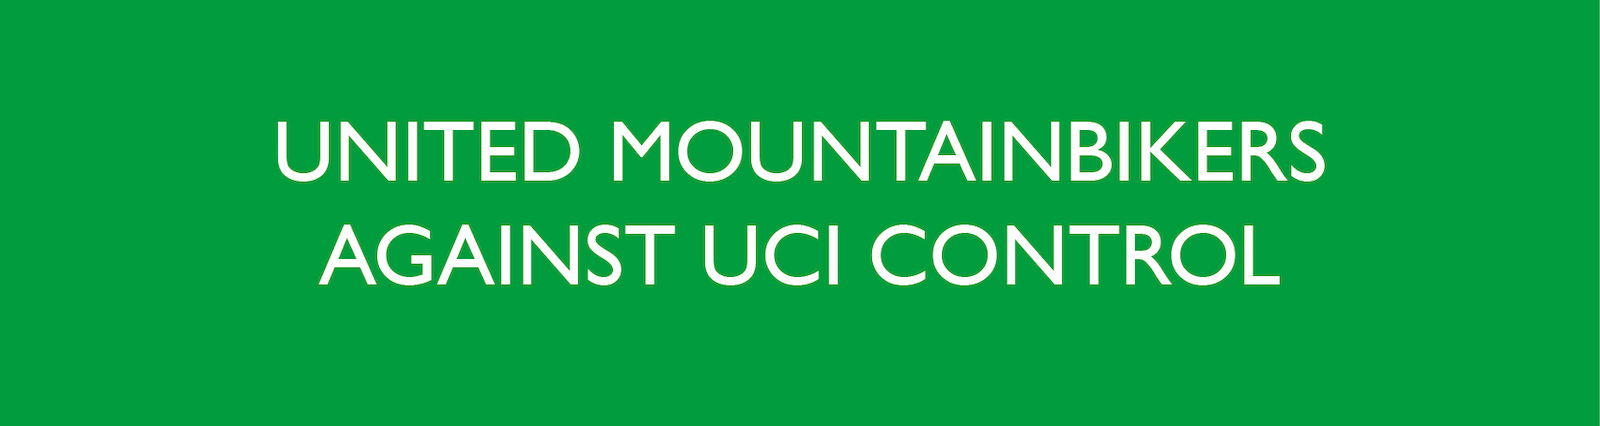 United mountaibikers against UCI control